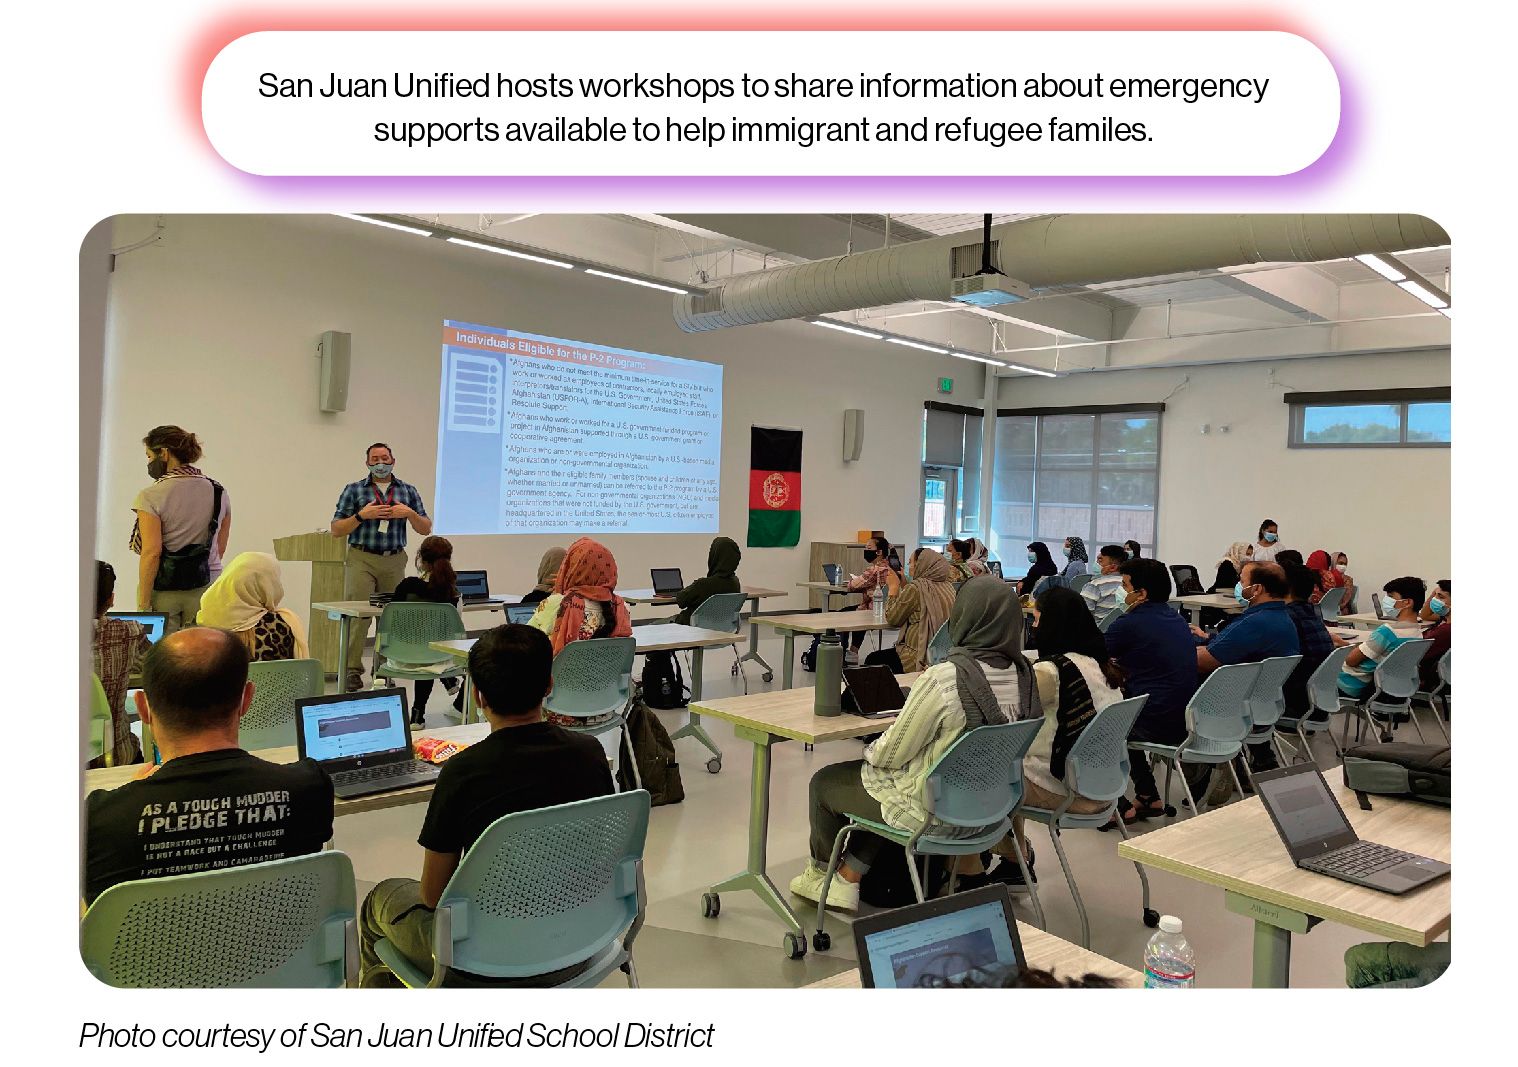 Image: A classroom full of adults watch a PowerPoint presentation, with the SchoolCEO caption 'San Juan Unified hosts workshops to share information about emergency supports available to help immigrant and refugee families.'